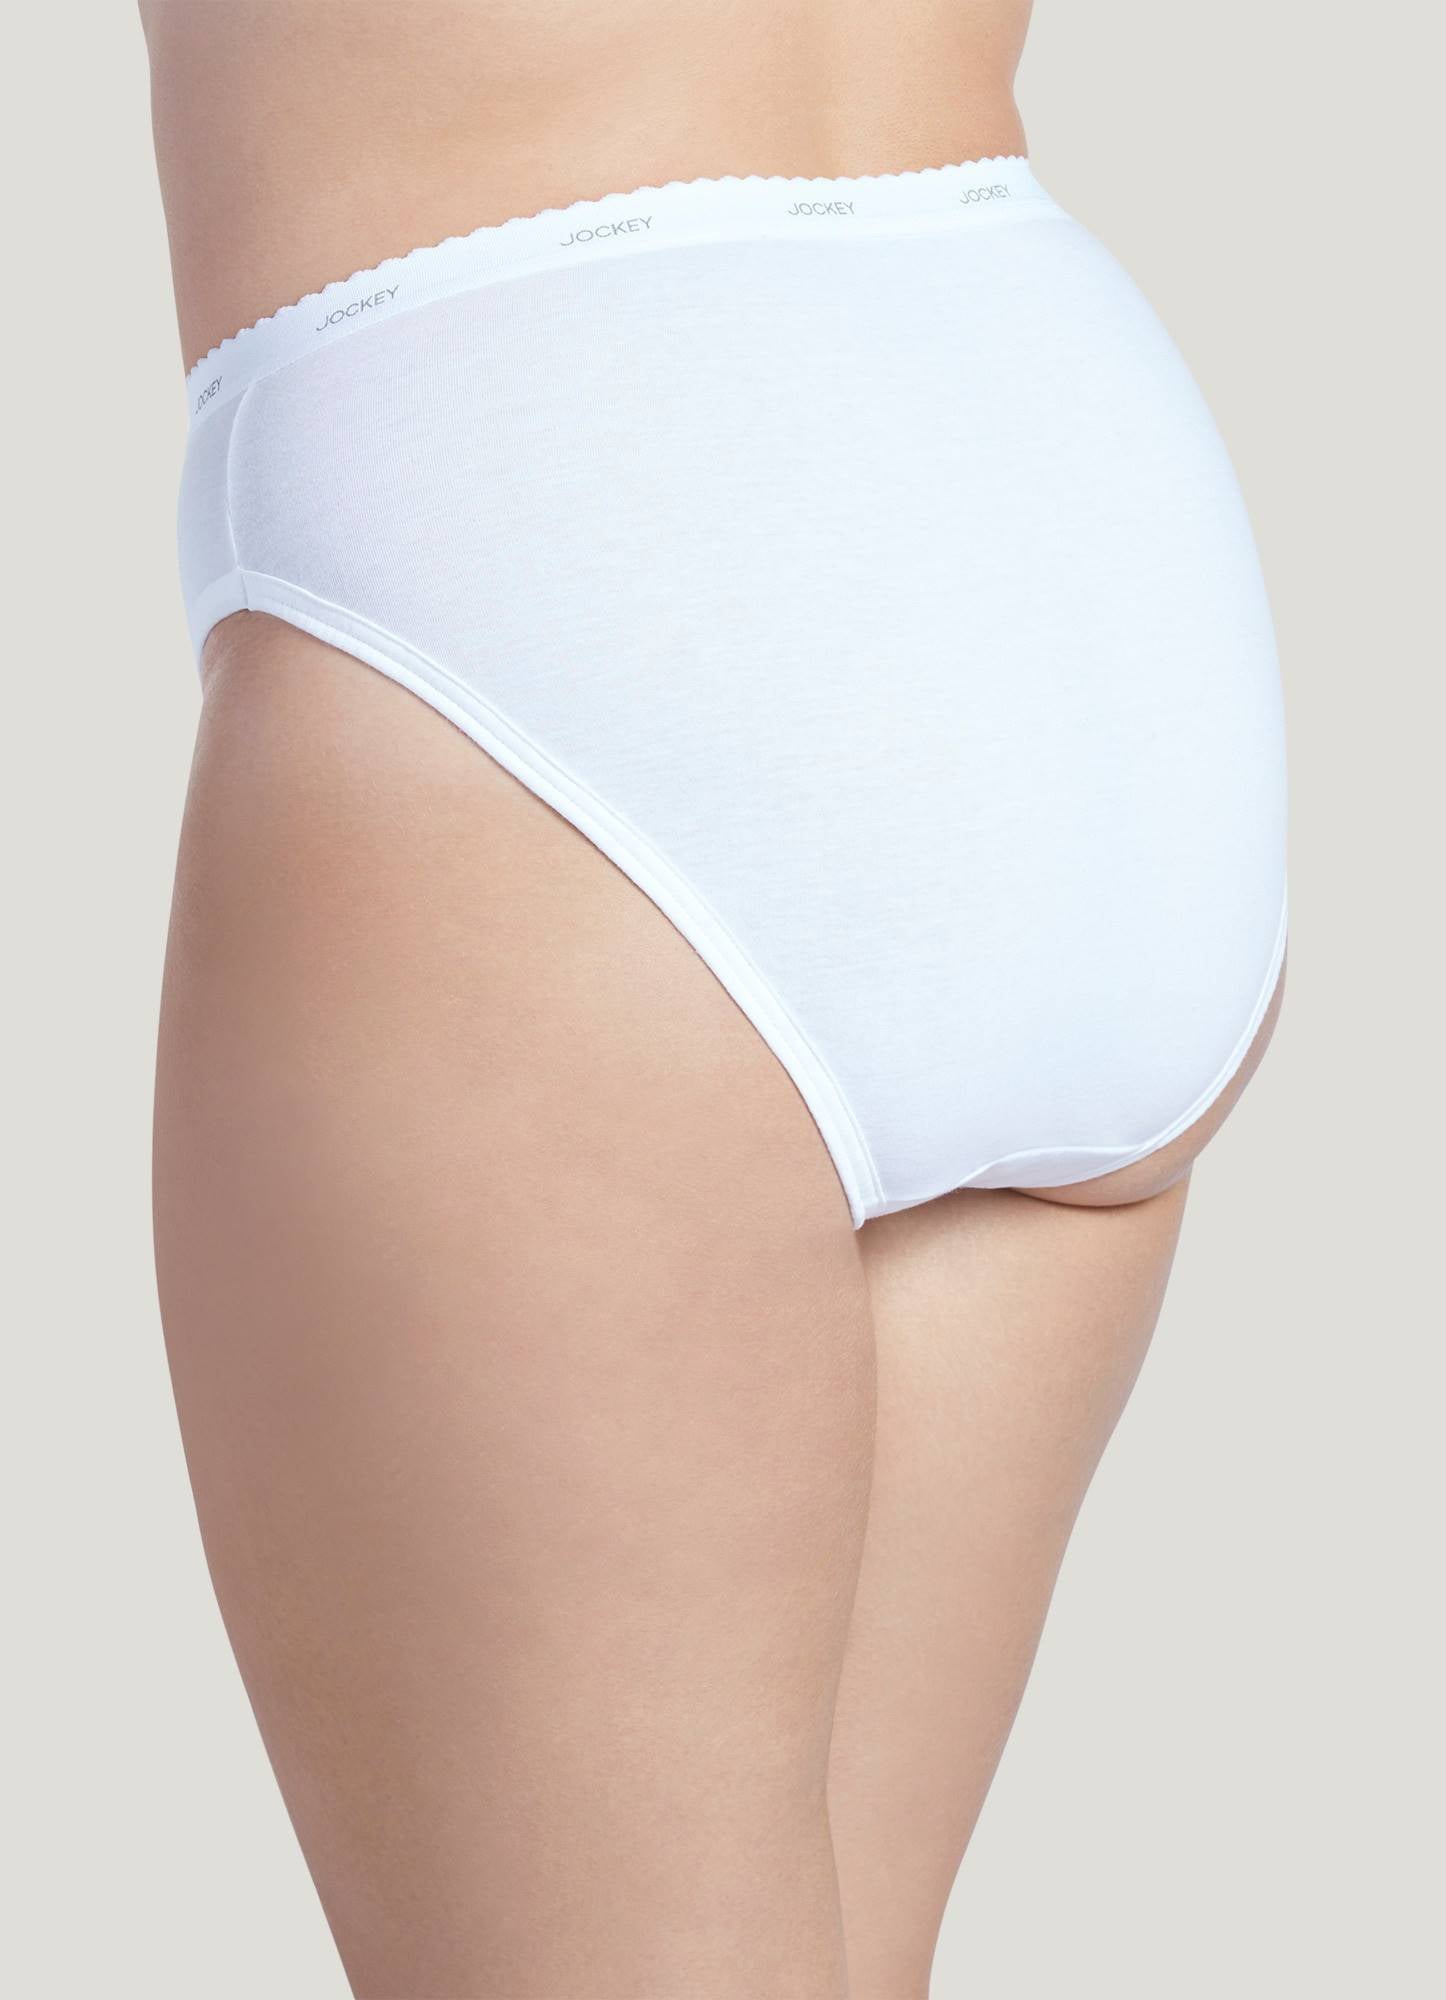 Jockey Classic French Cut Panty - Pack of 3